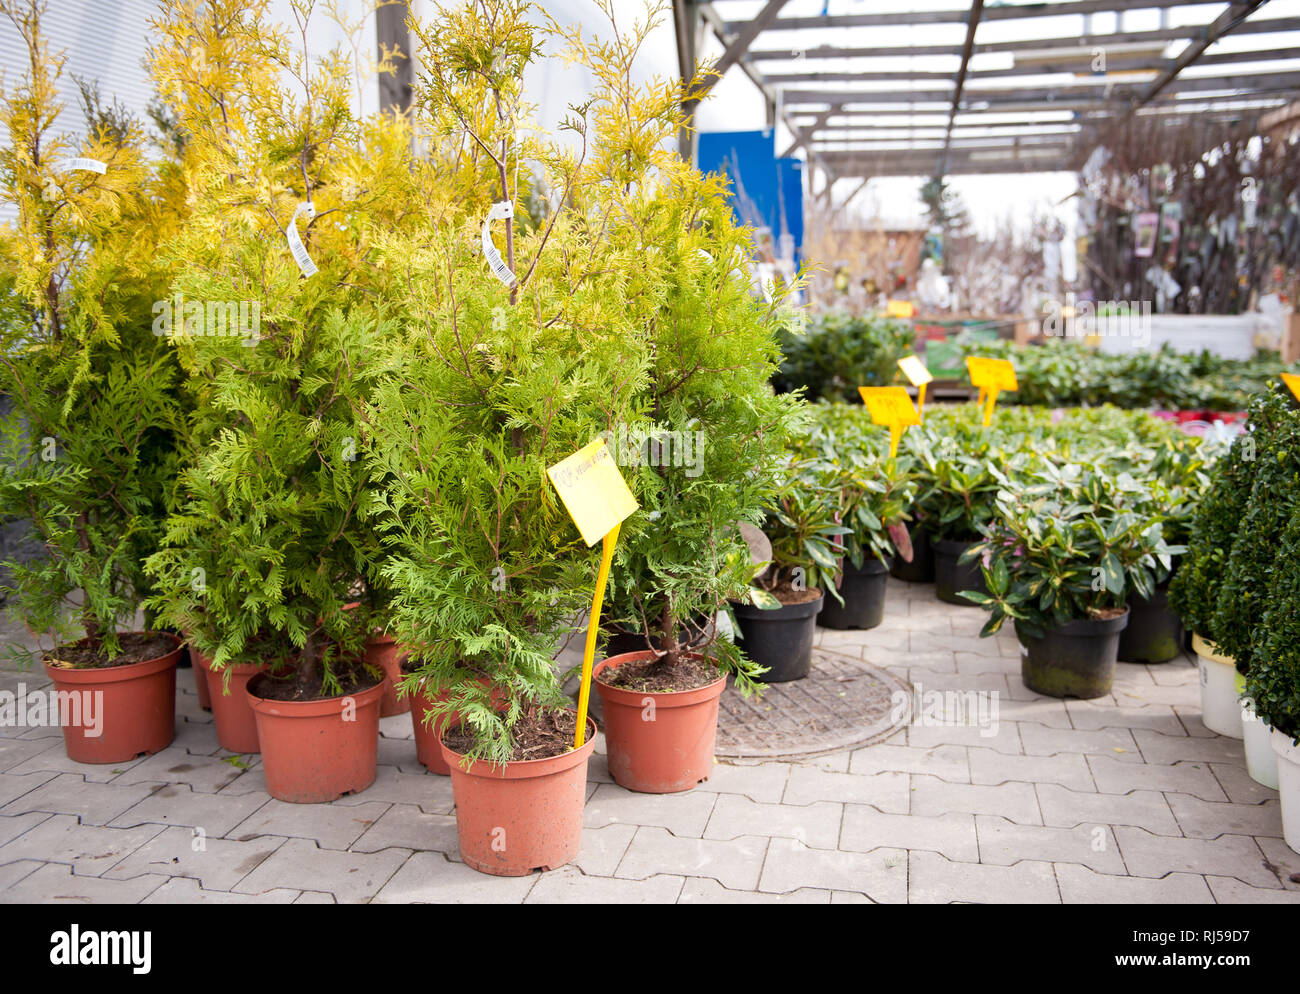 Young Thuja Yellow Ribbon seedlings little trees, seedlings in brown plastic flowerpots with yellow price sticks on the ground in market place in shop Stock Photo